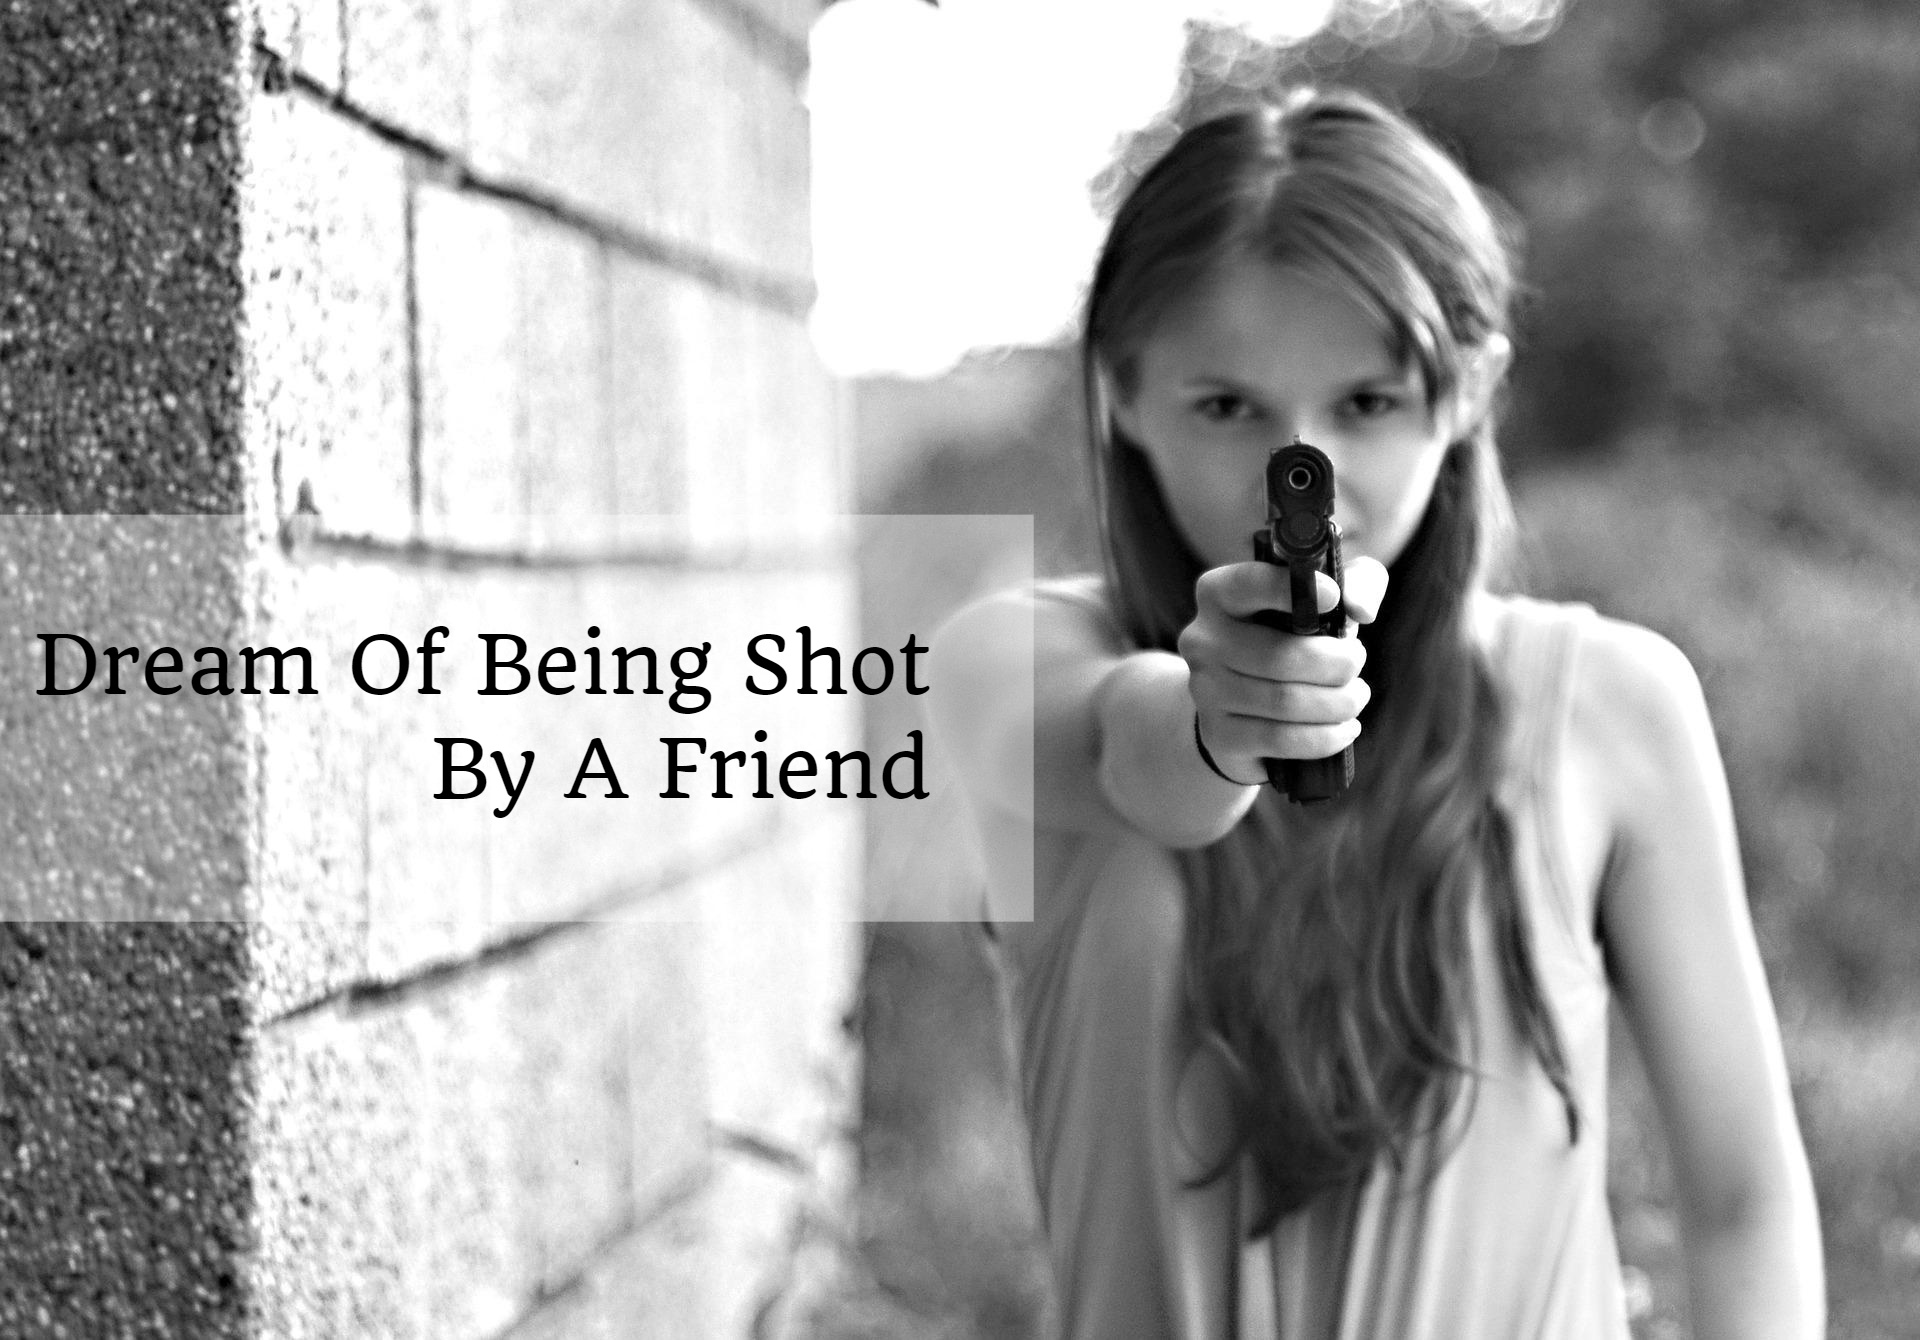 A girl holding a gun and pointing it directly at the camera